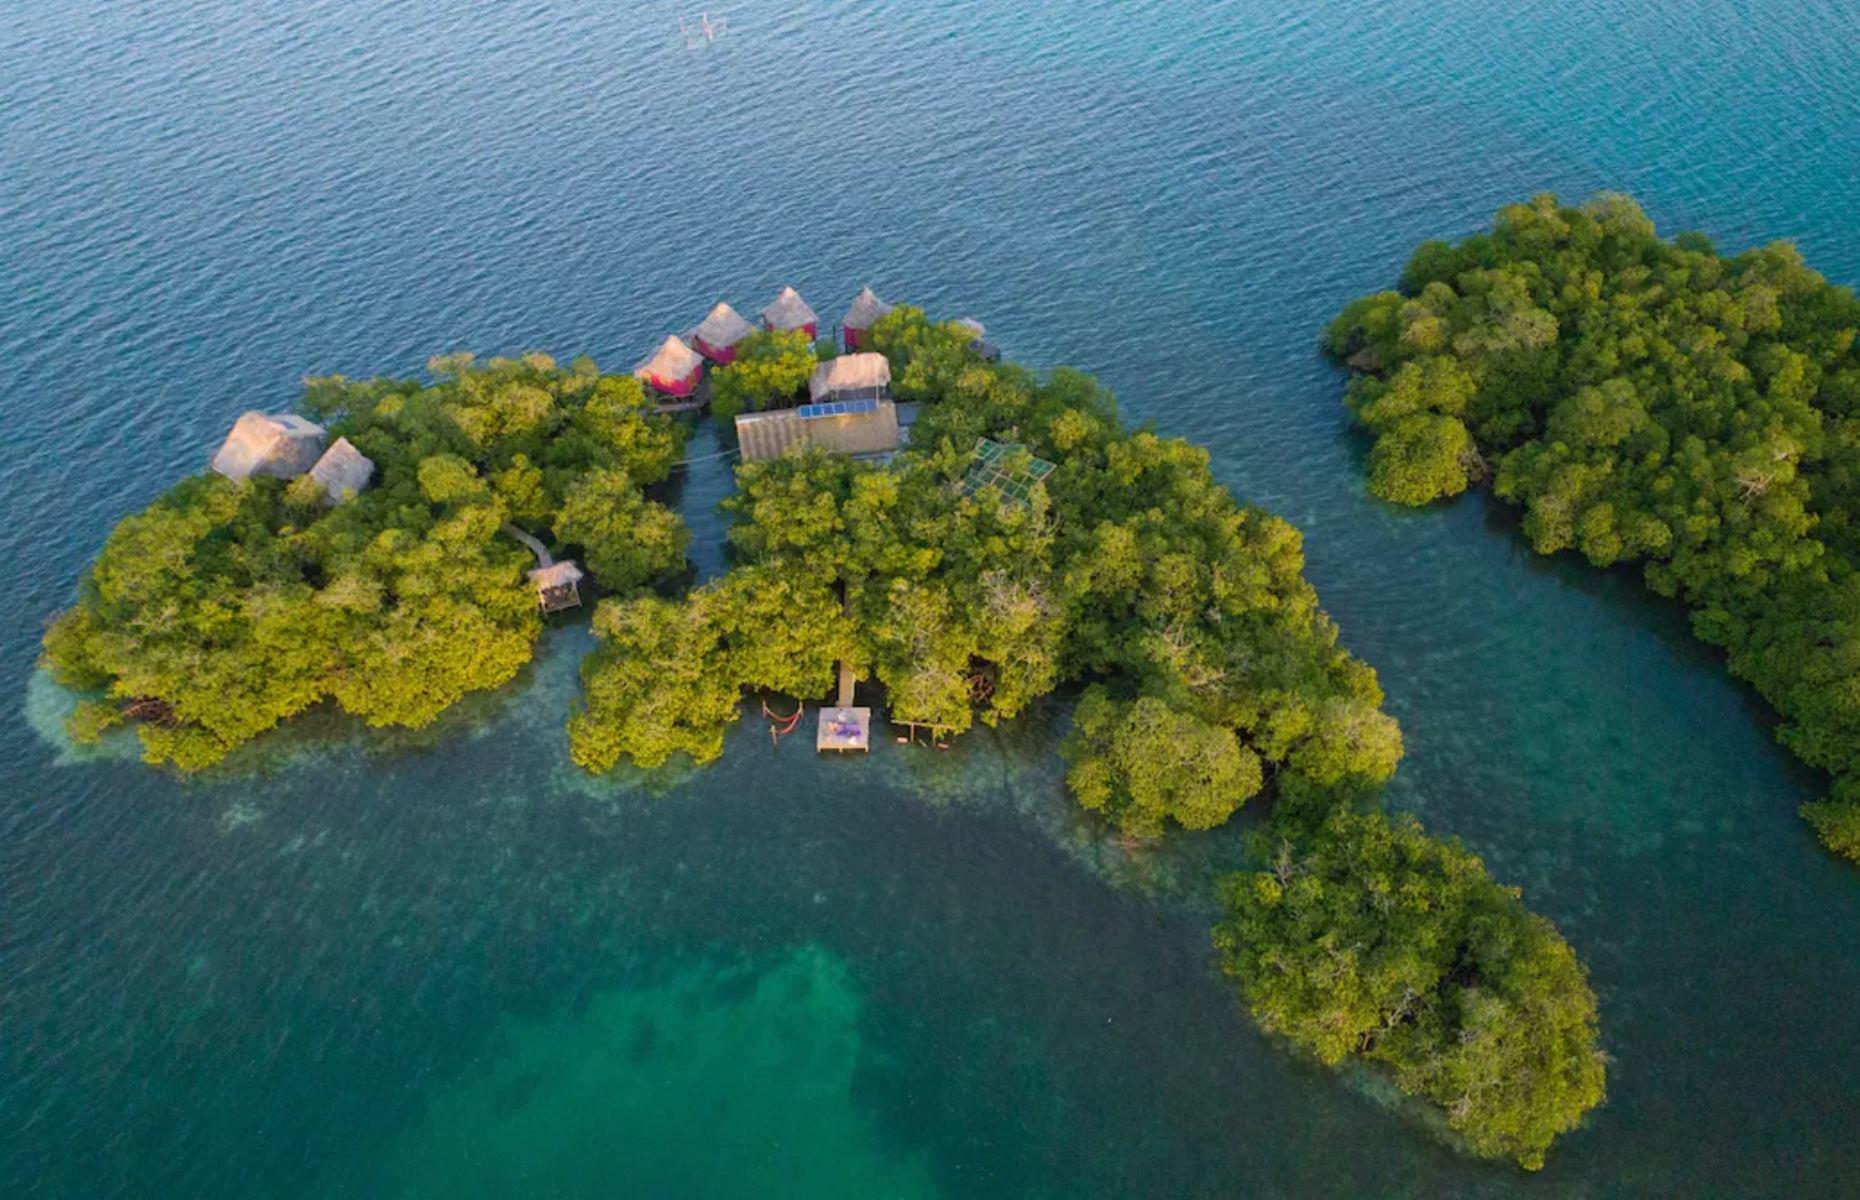 Sitting like a gorgeous green jewel within the vibrant waters of Panama's Bocas del Toro province, the Honeymooners Hut is a stunning property on its very own mangrove island. As the name suggests, it's heavily geared towards romance, with the accommodation catering to just two guests.